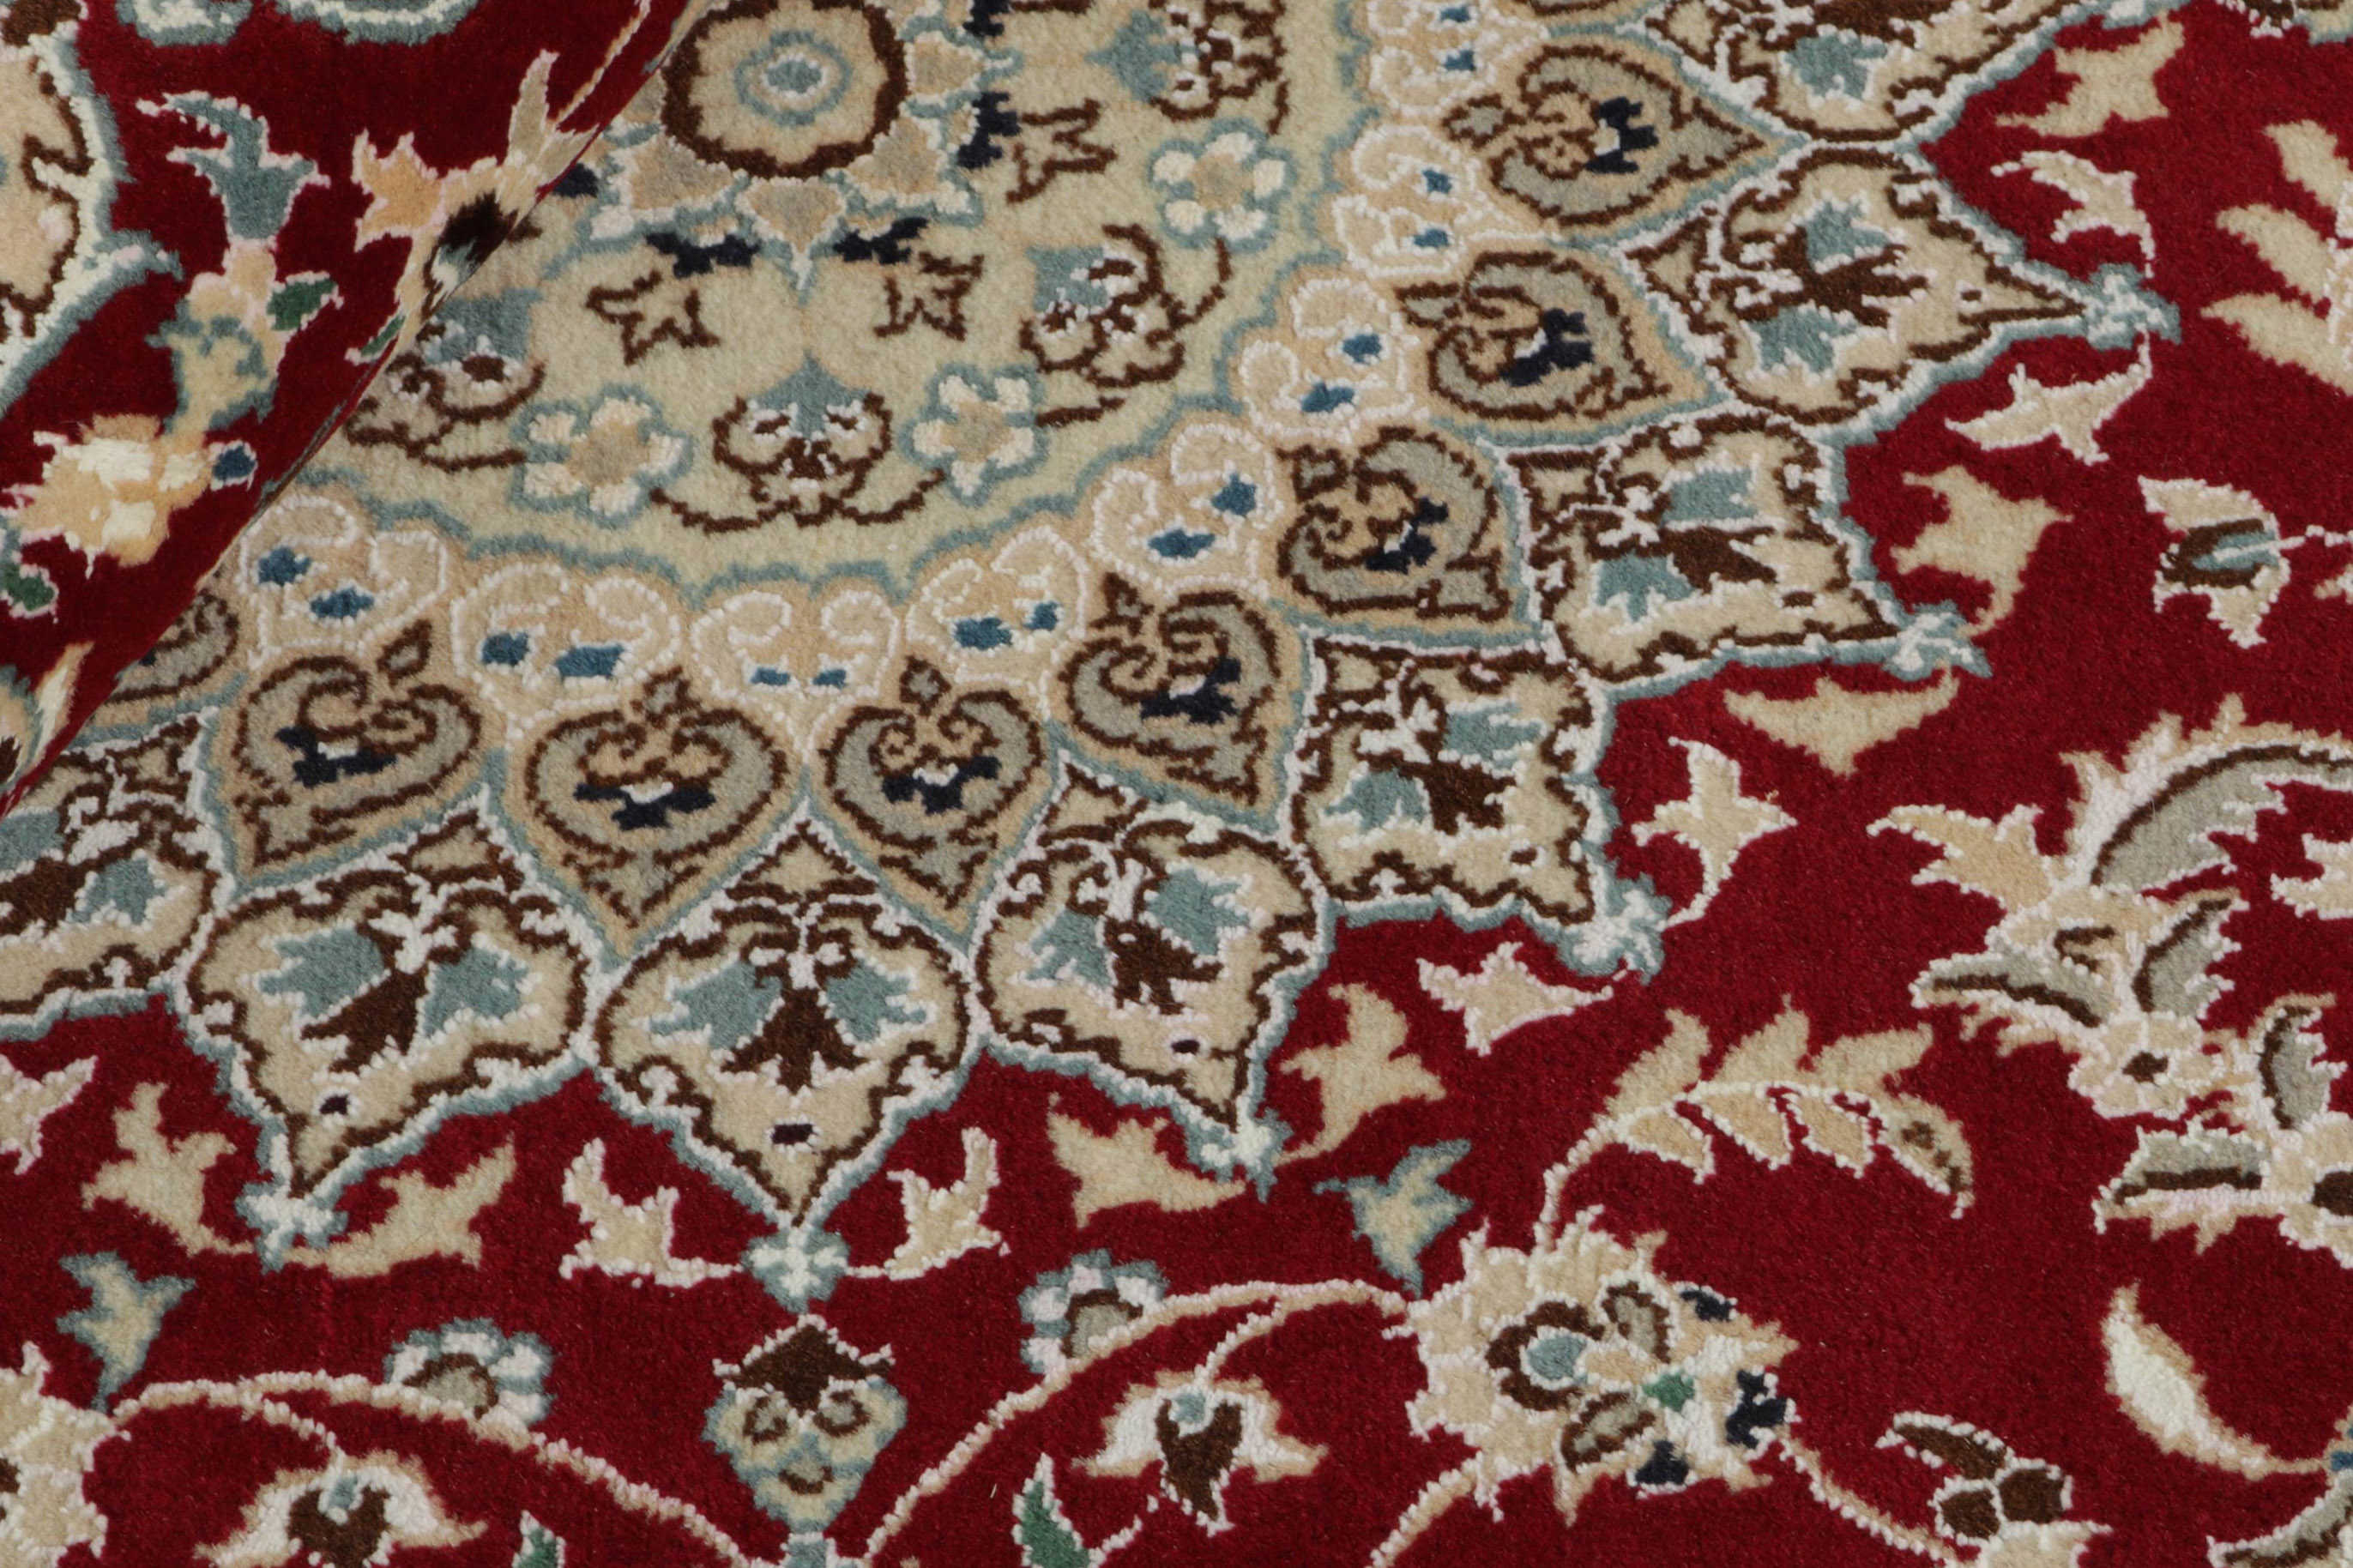 Authentic oriental rug with traditional floral design in red